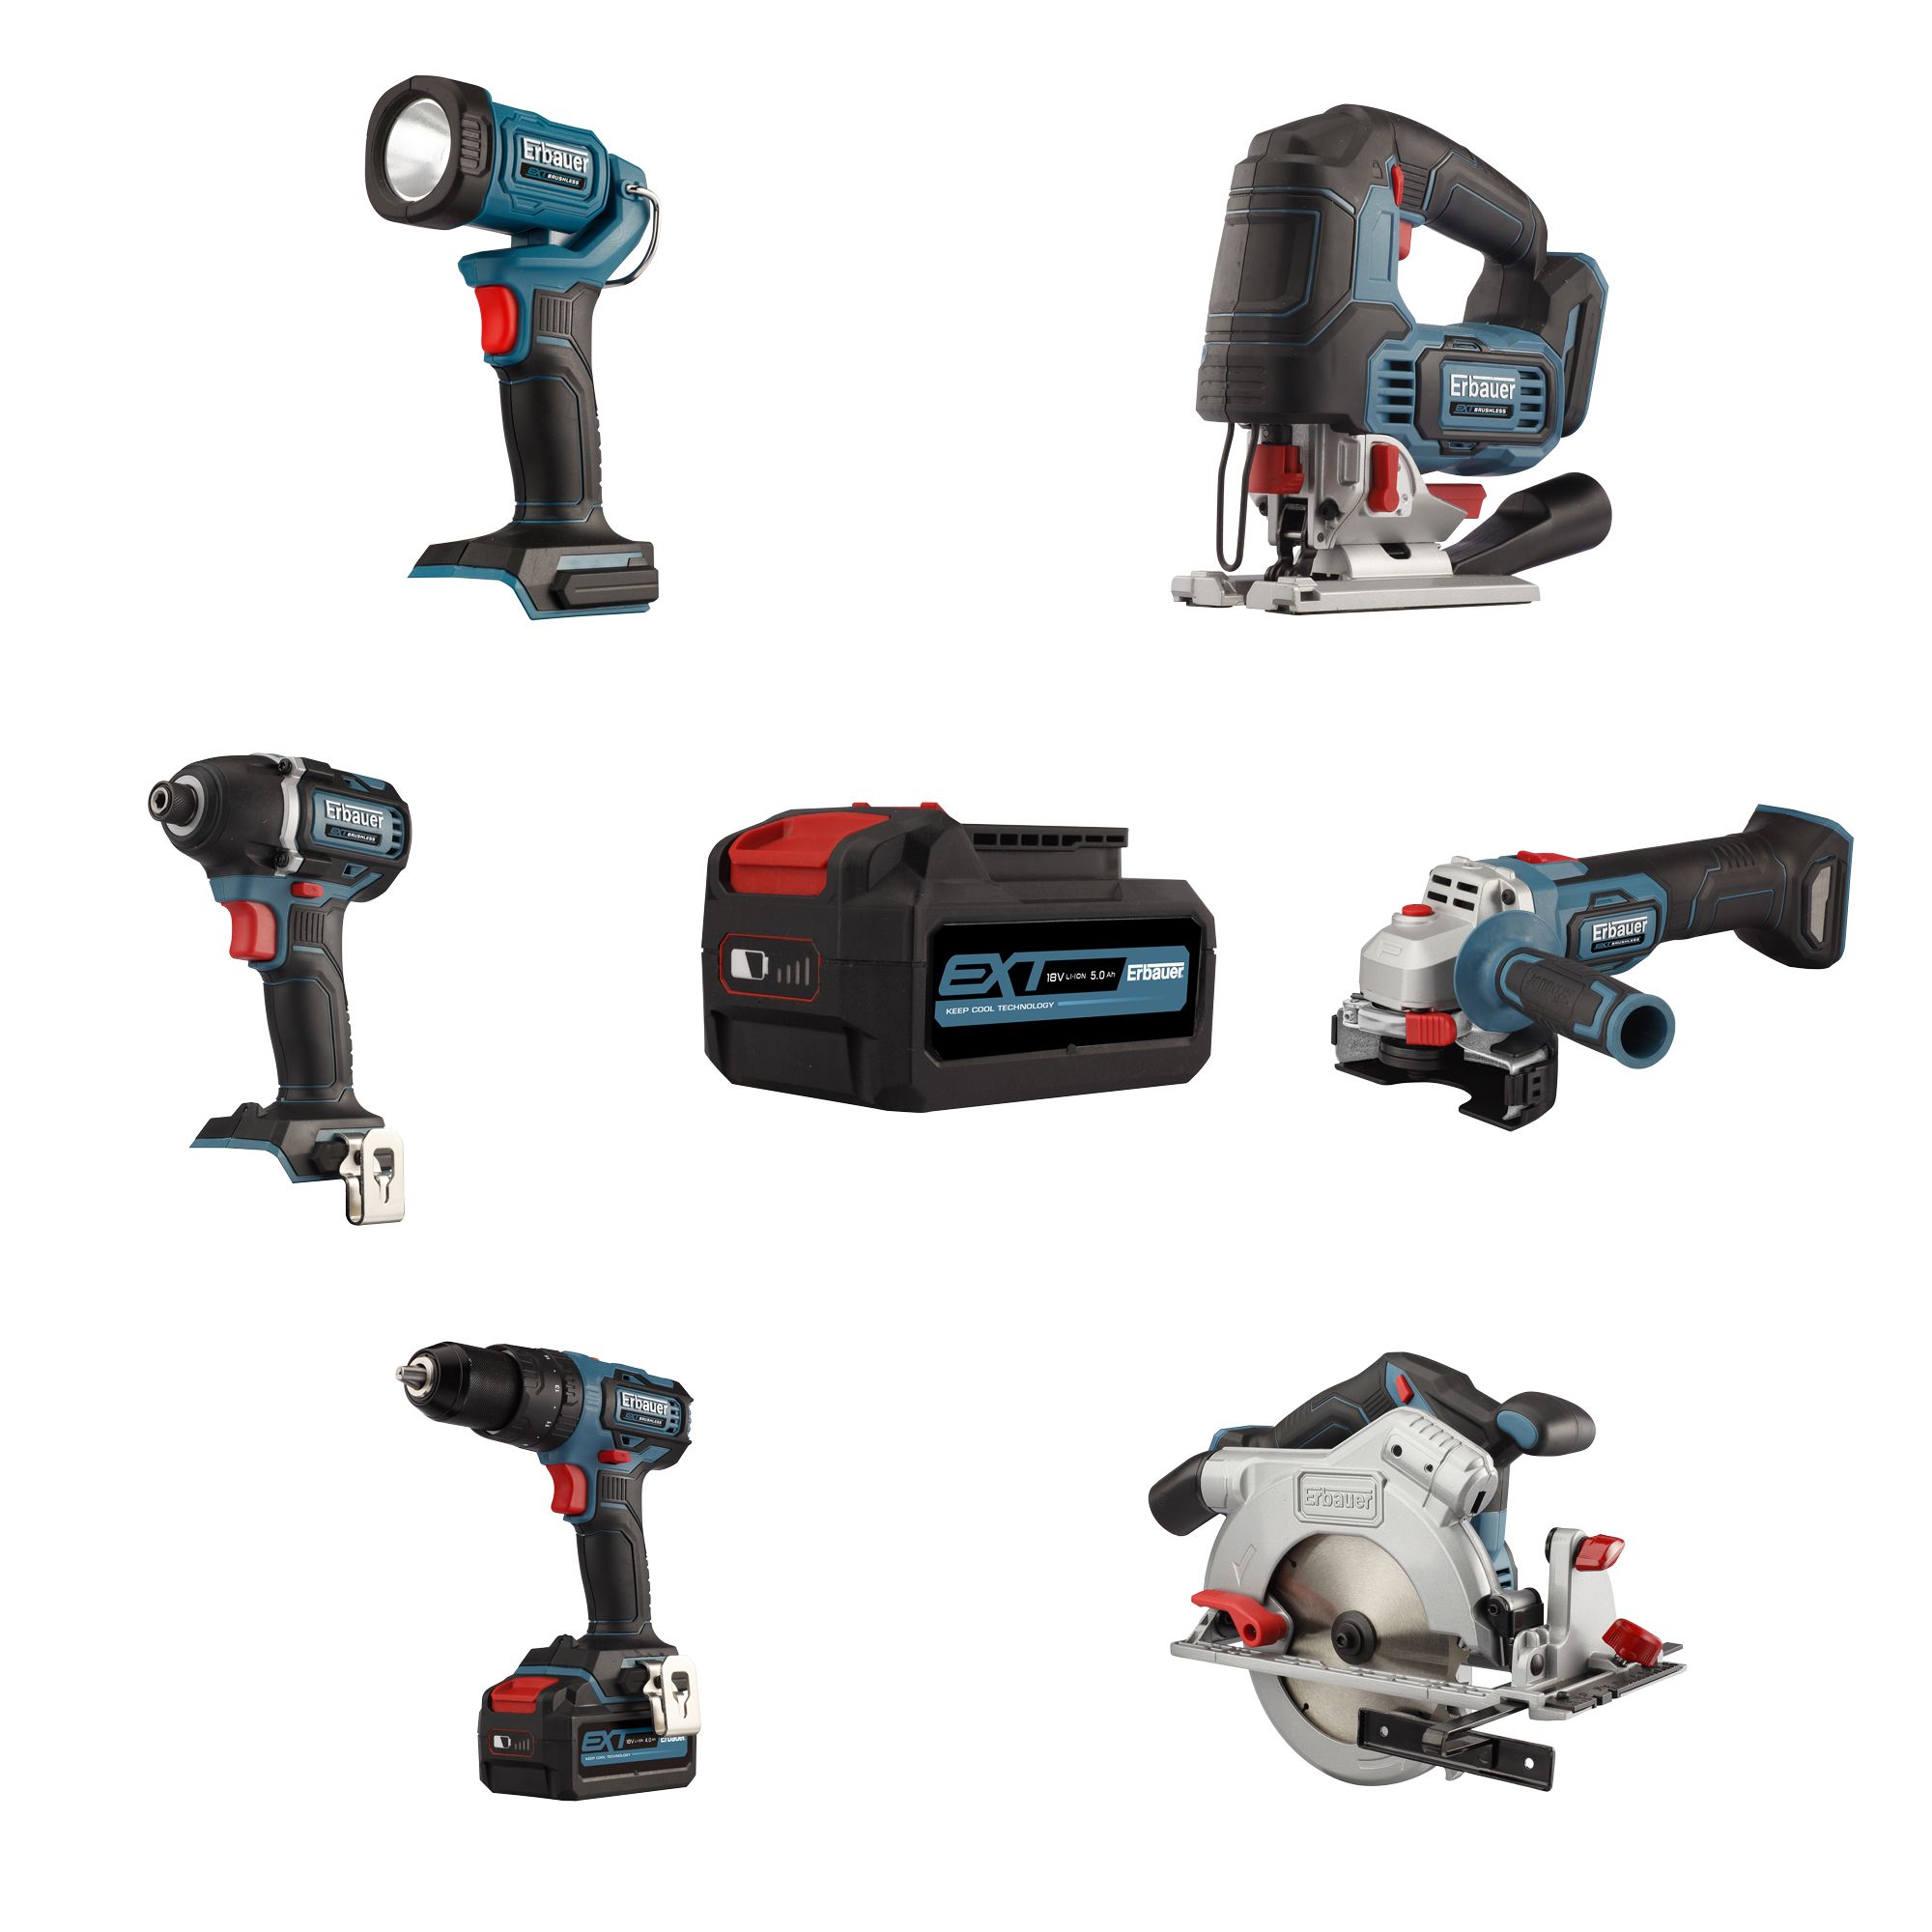 how good are erbauer power tools? 2